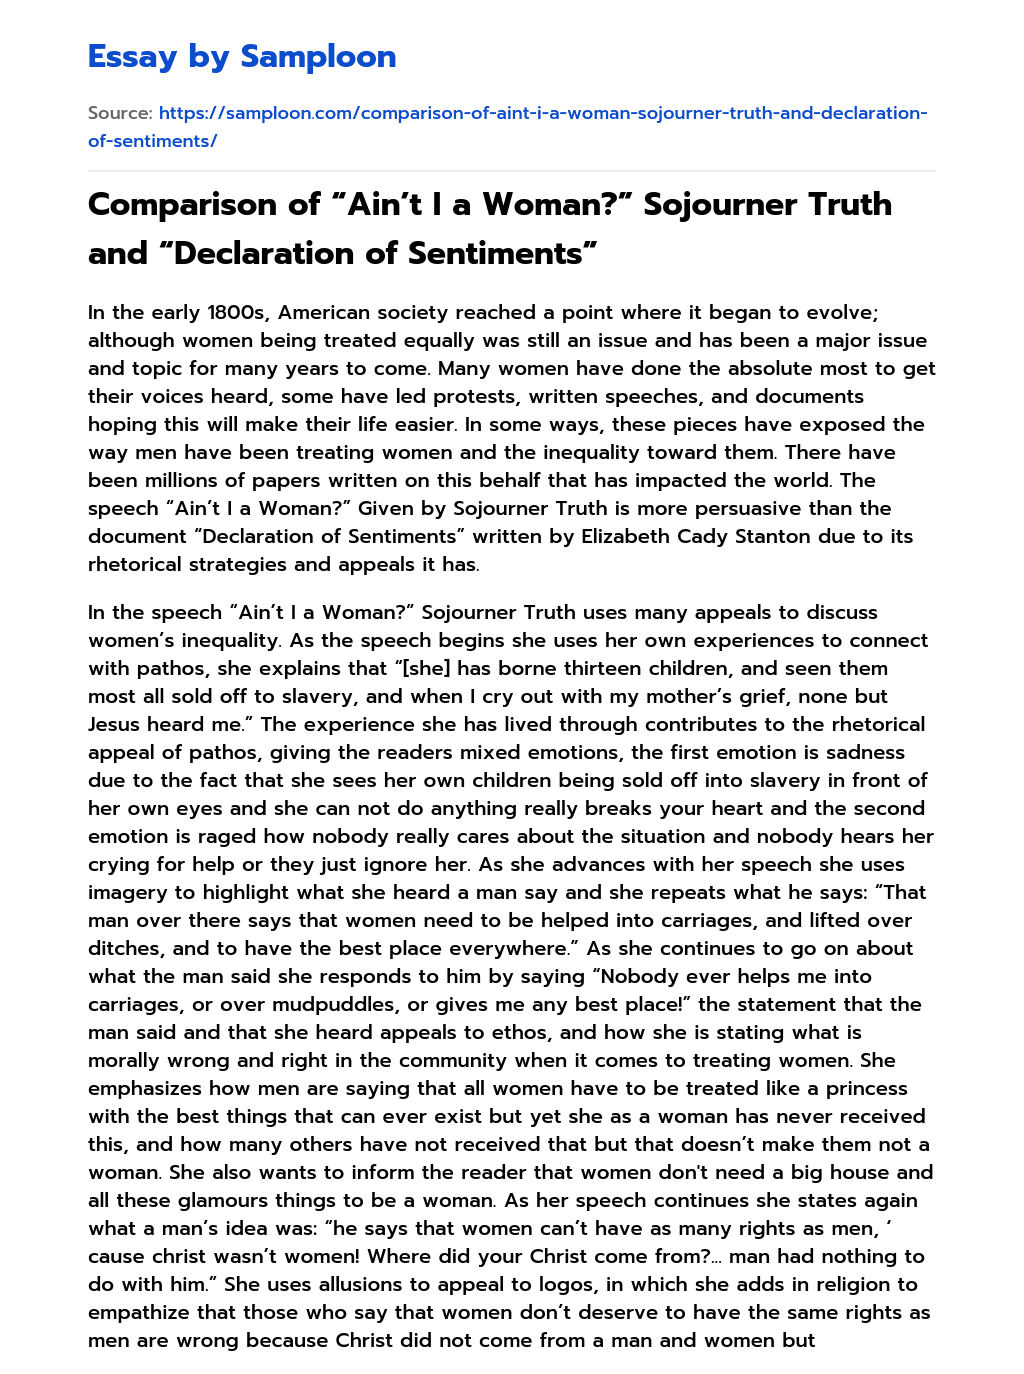 Comparison of “Ain’t I a Woman?” Sojourner Truth and “Declaration of Sentiments” Rhetorical Analysis essay